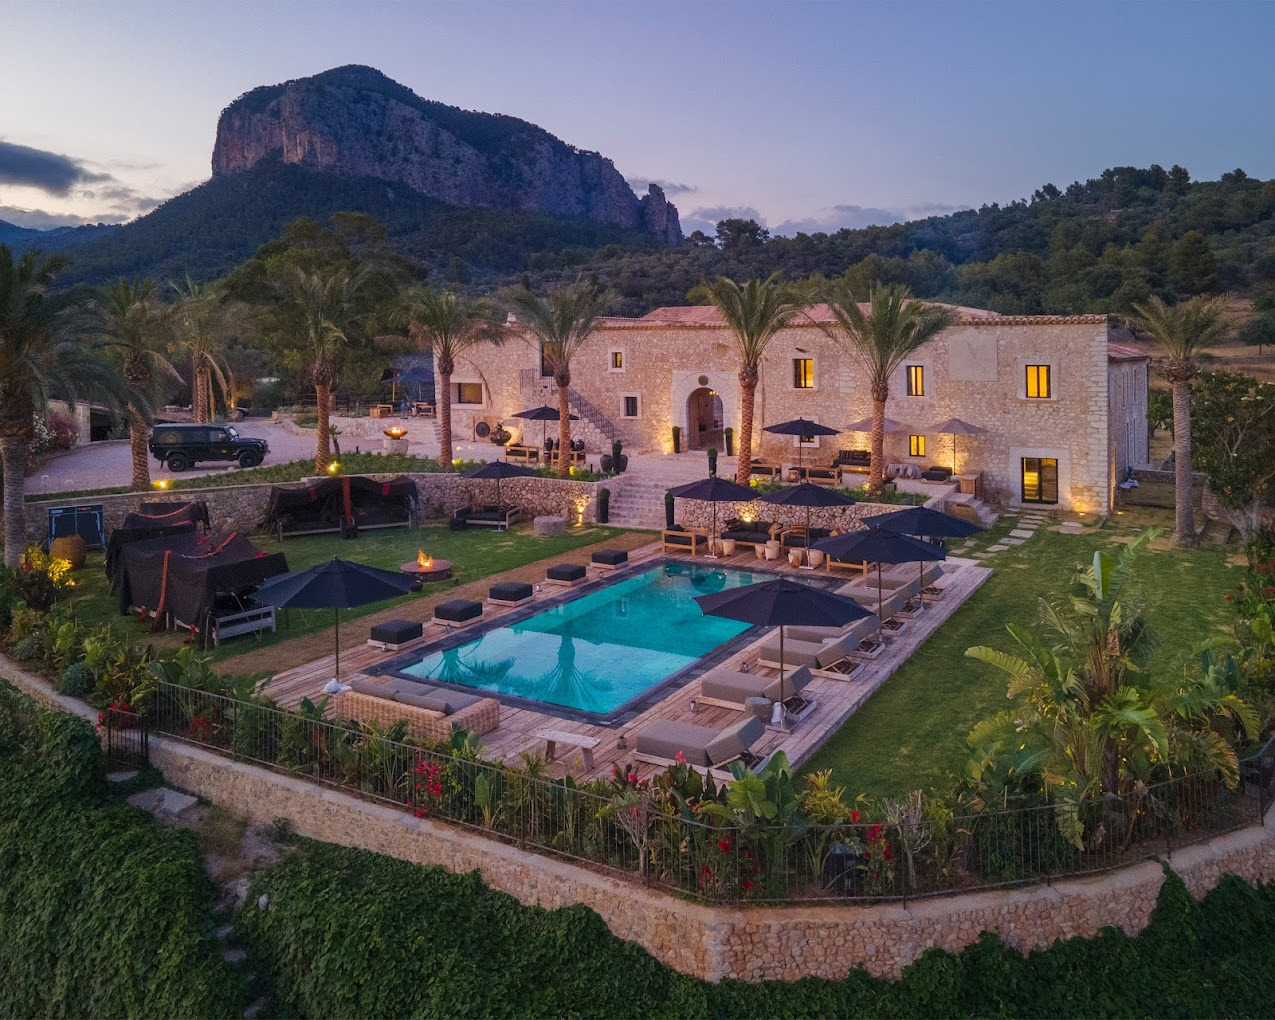 The luxury villa rental agency is one of the most reputable in Spain. It provides the perfect vacation plans and helps visitors bring their dream vacations into reality.